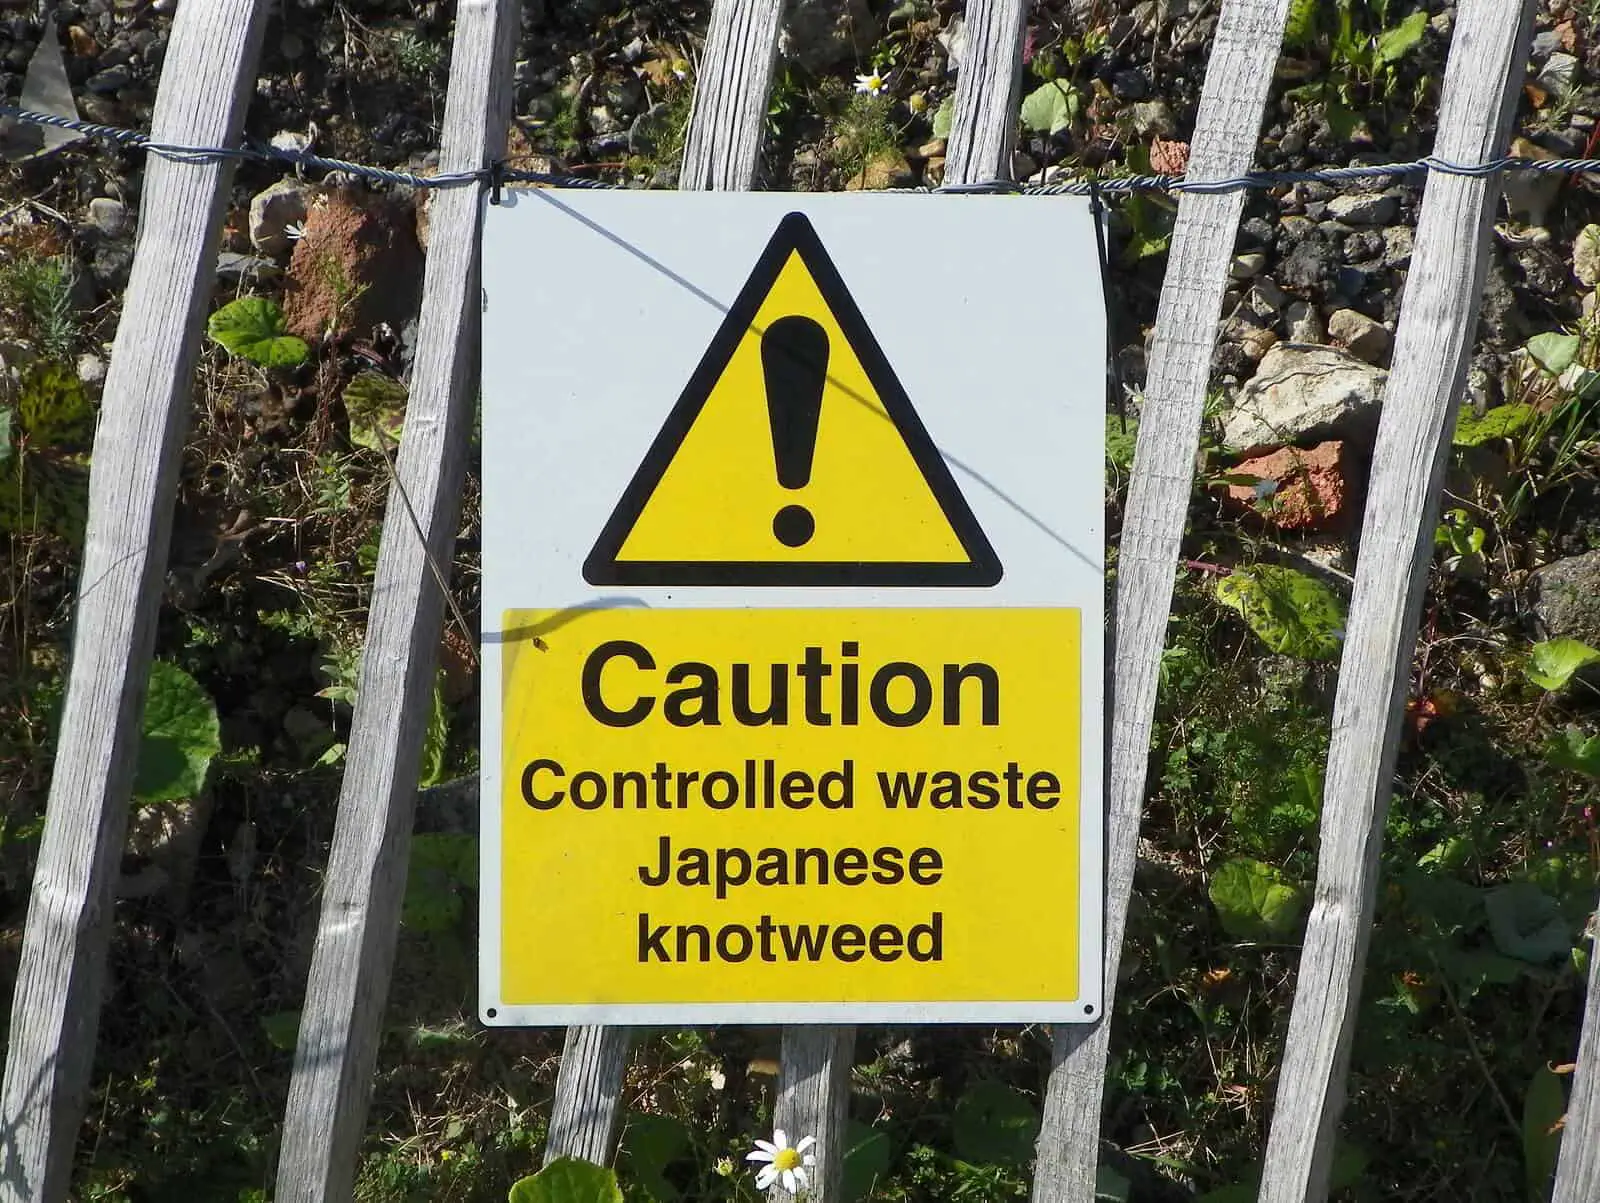 Treatment Plan to resolve the infestation of Japanese knotweed